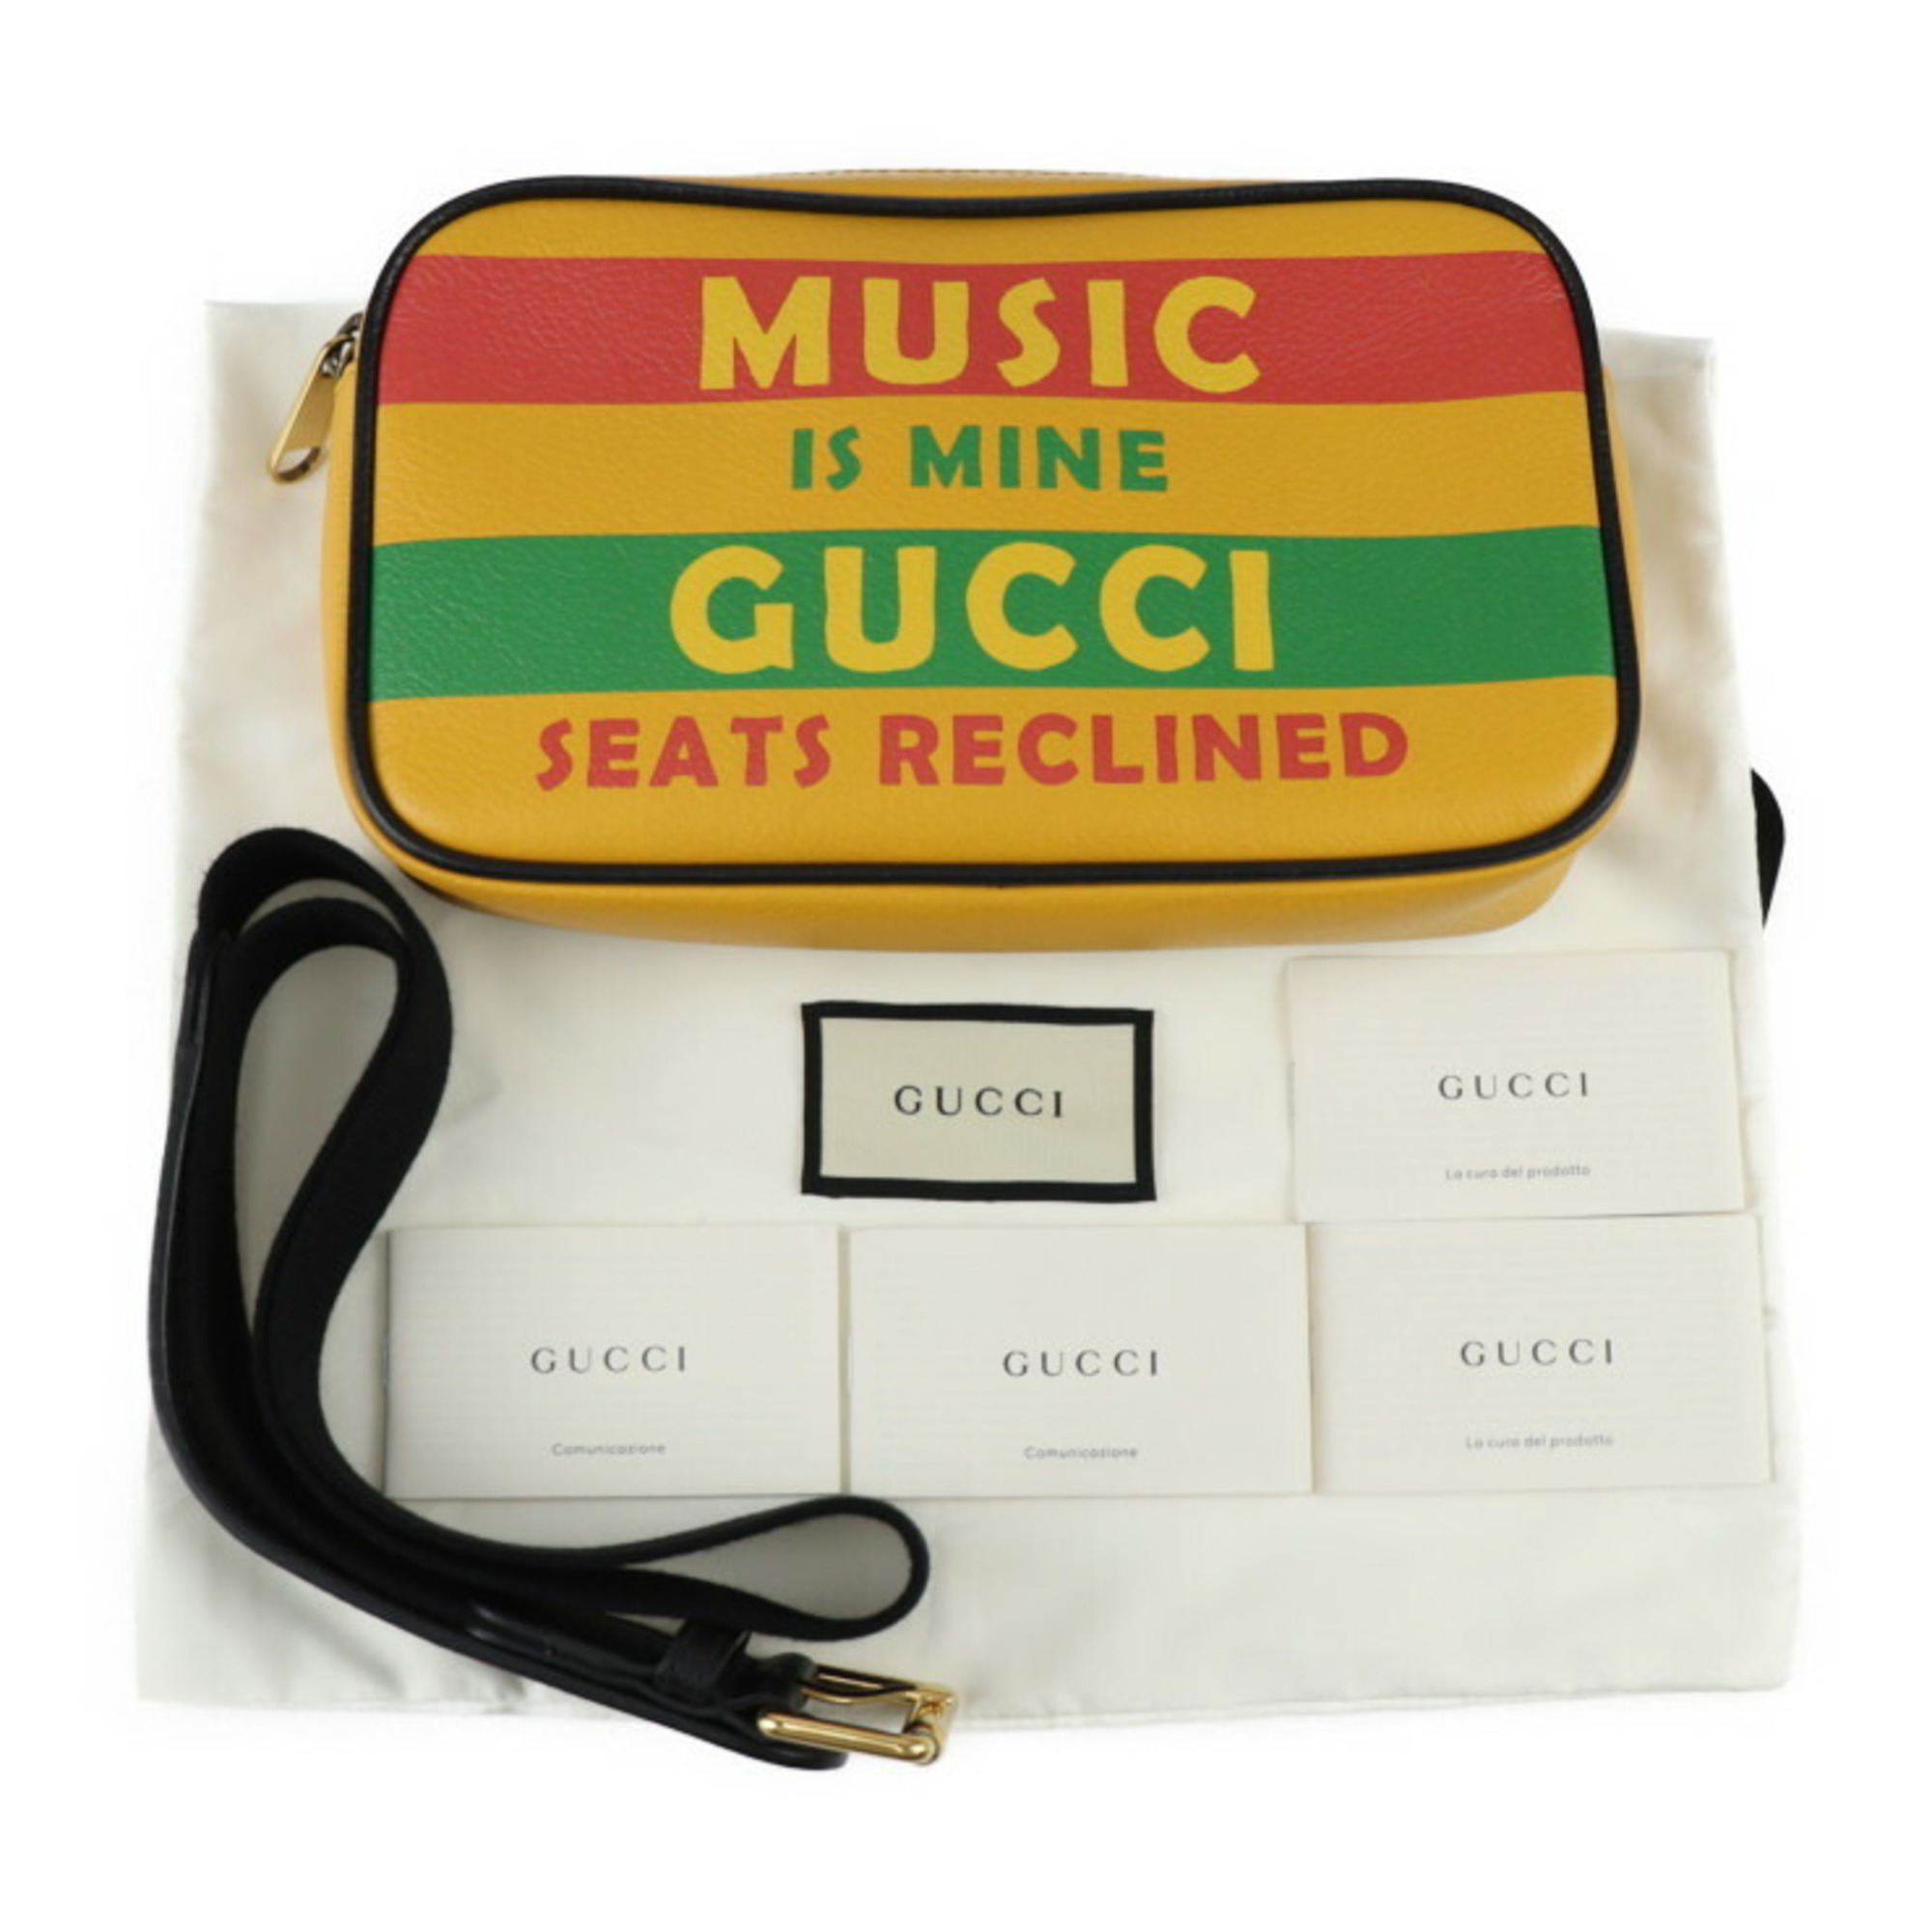 GUCCI Gucci Belt Bag SONY MUSIC Collaboration Waist 602695 Leather Yellow Multicolor Gold Hardware 100th Anniversary Logo Body Pouch Bum